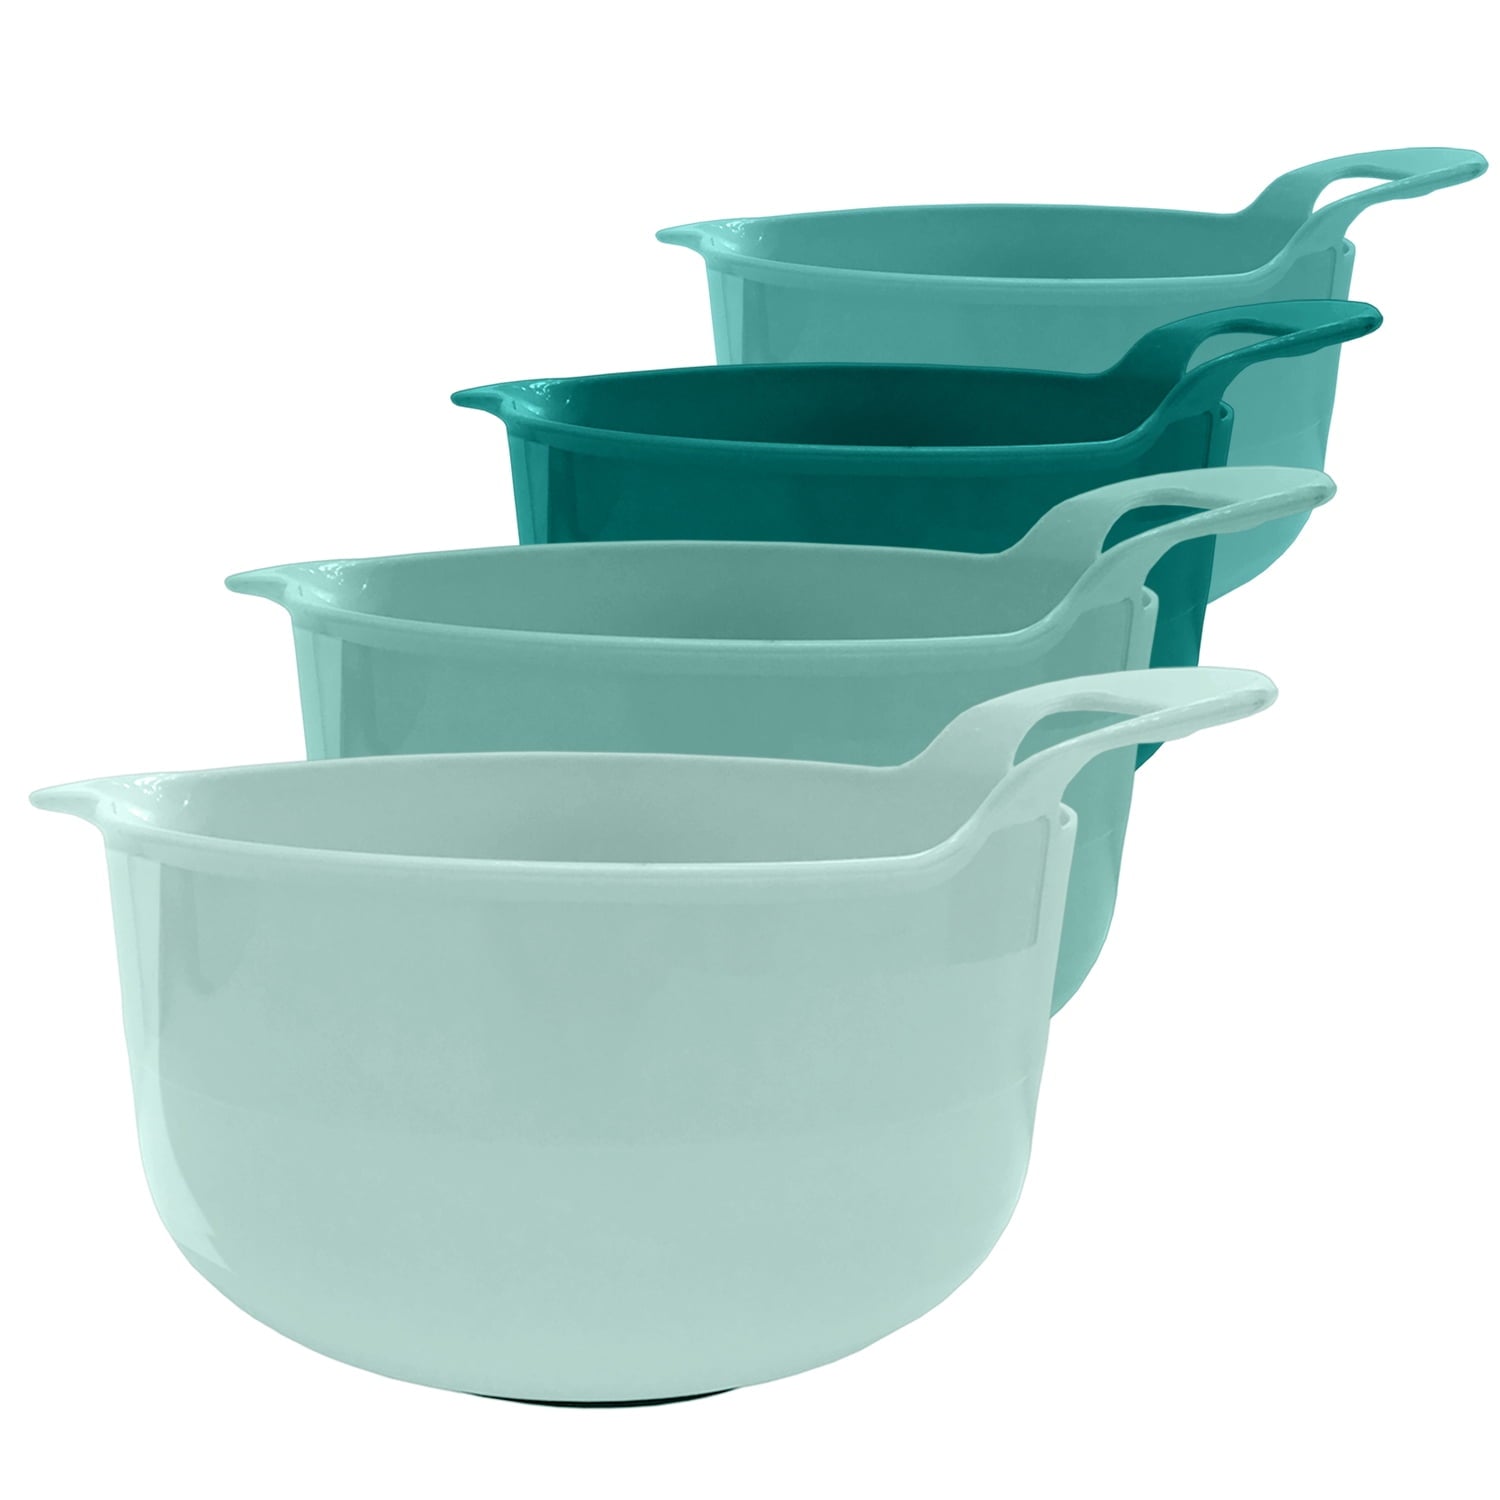 Edge Mixing Bowls 4 Piece Plastic Non-Skid Nesting Bowls with Spouts and Handles, Teal